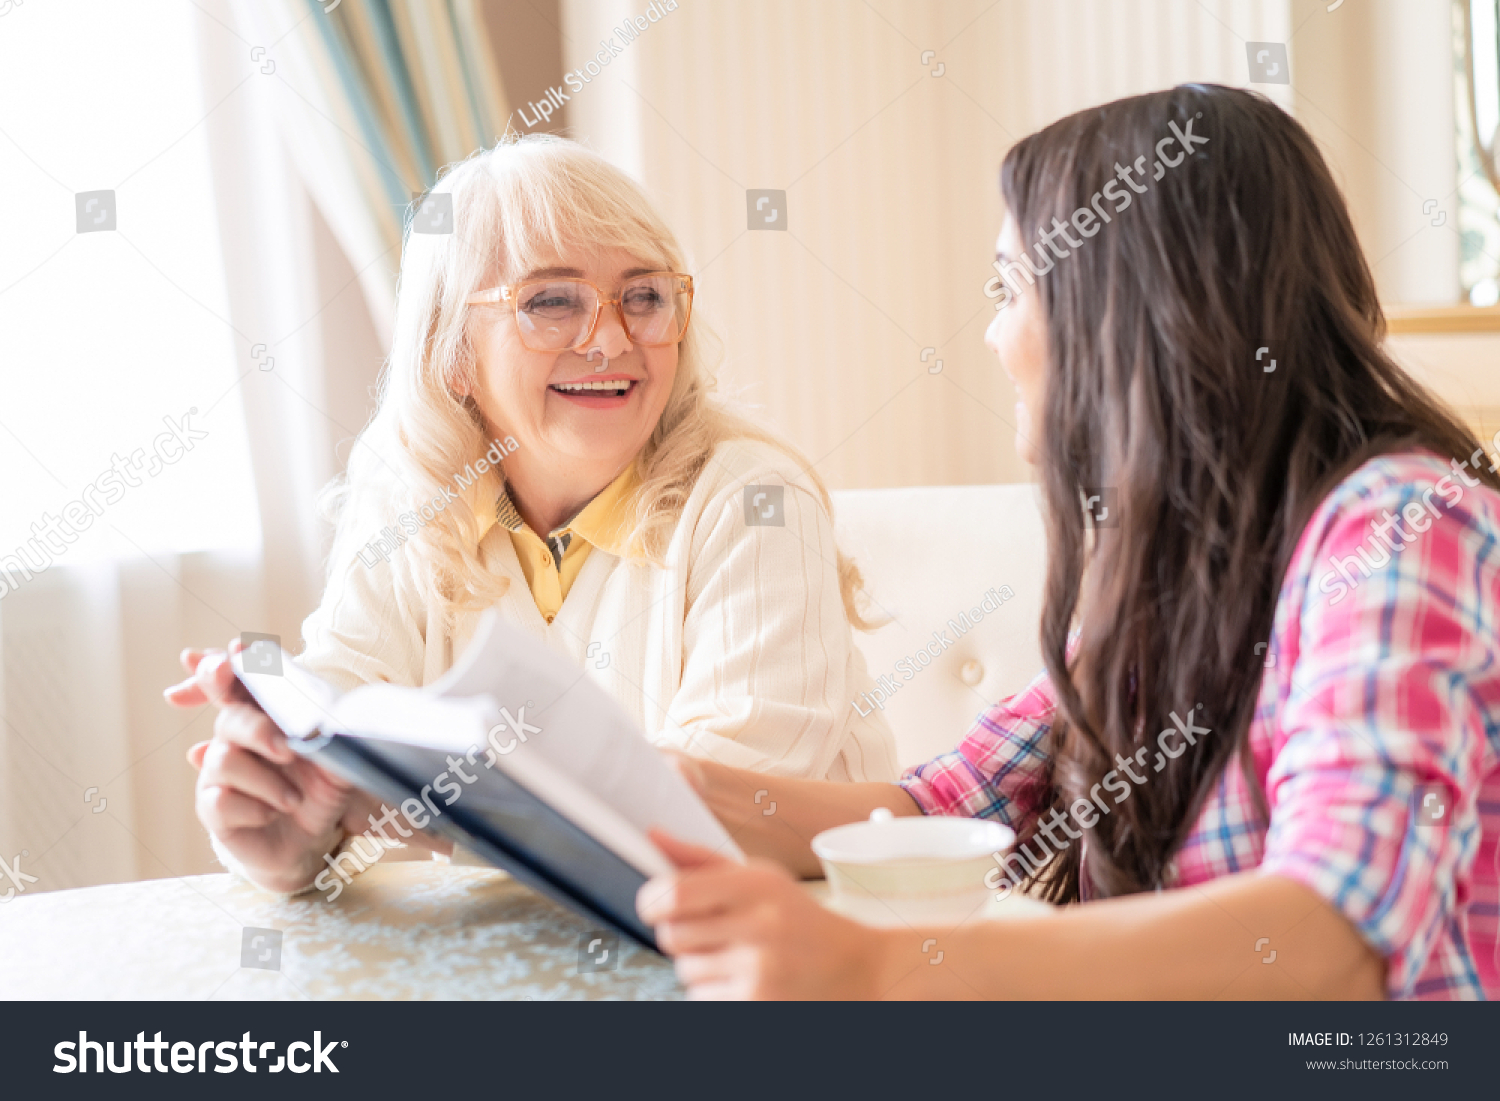 Delighted Elderly Mother Looks Happily On Her Younger Daughter Who Holds An Open Book And Drinks Tea. Caregiving Sitting. #1261312849